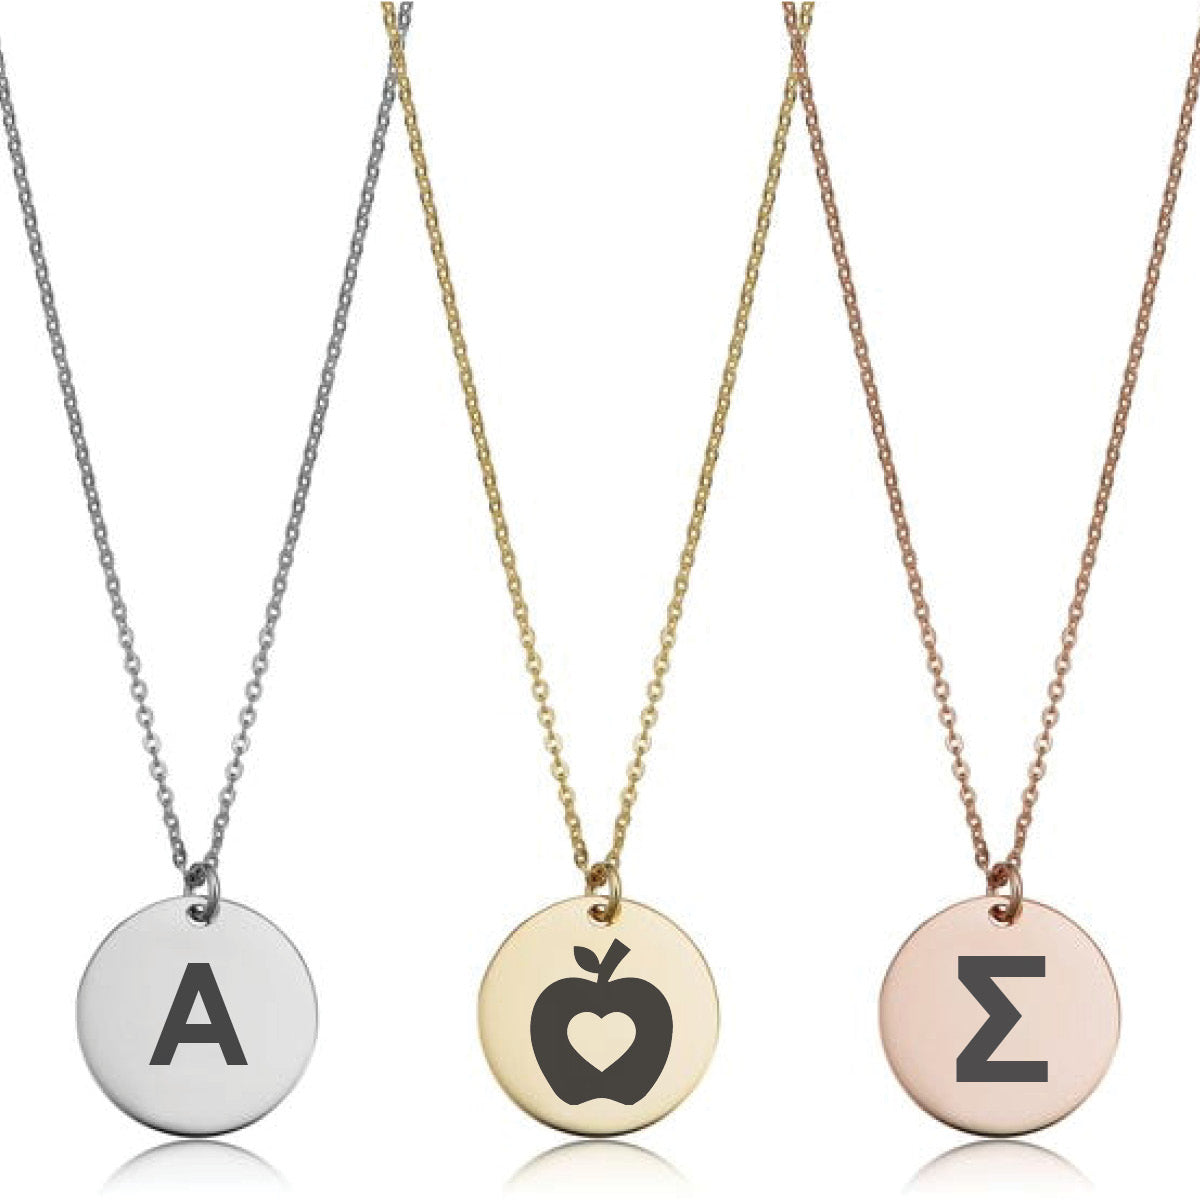 Three Name Stone Name Heart Necklace Silver Birthstone Jewelry Mom Engraved  Gift | eBay